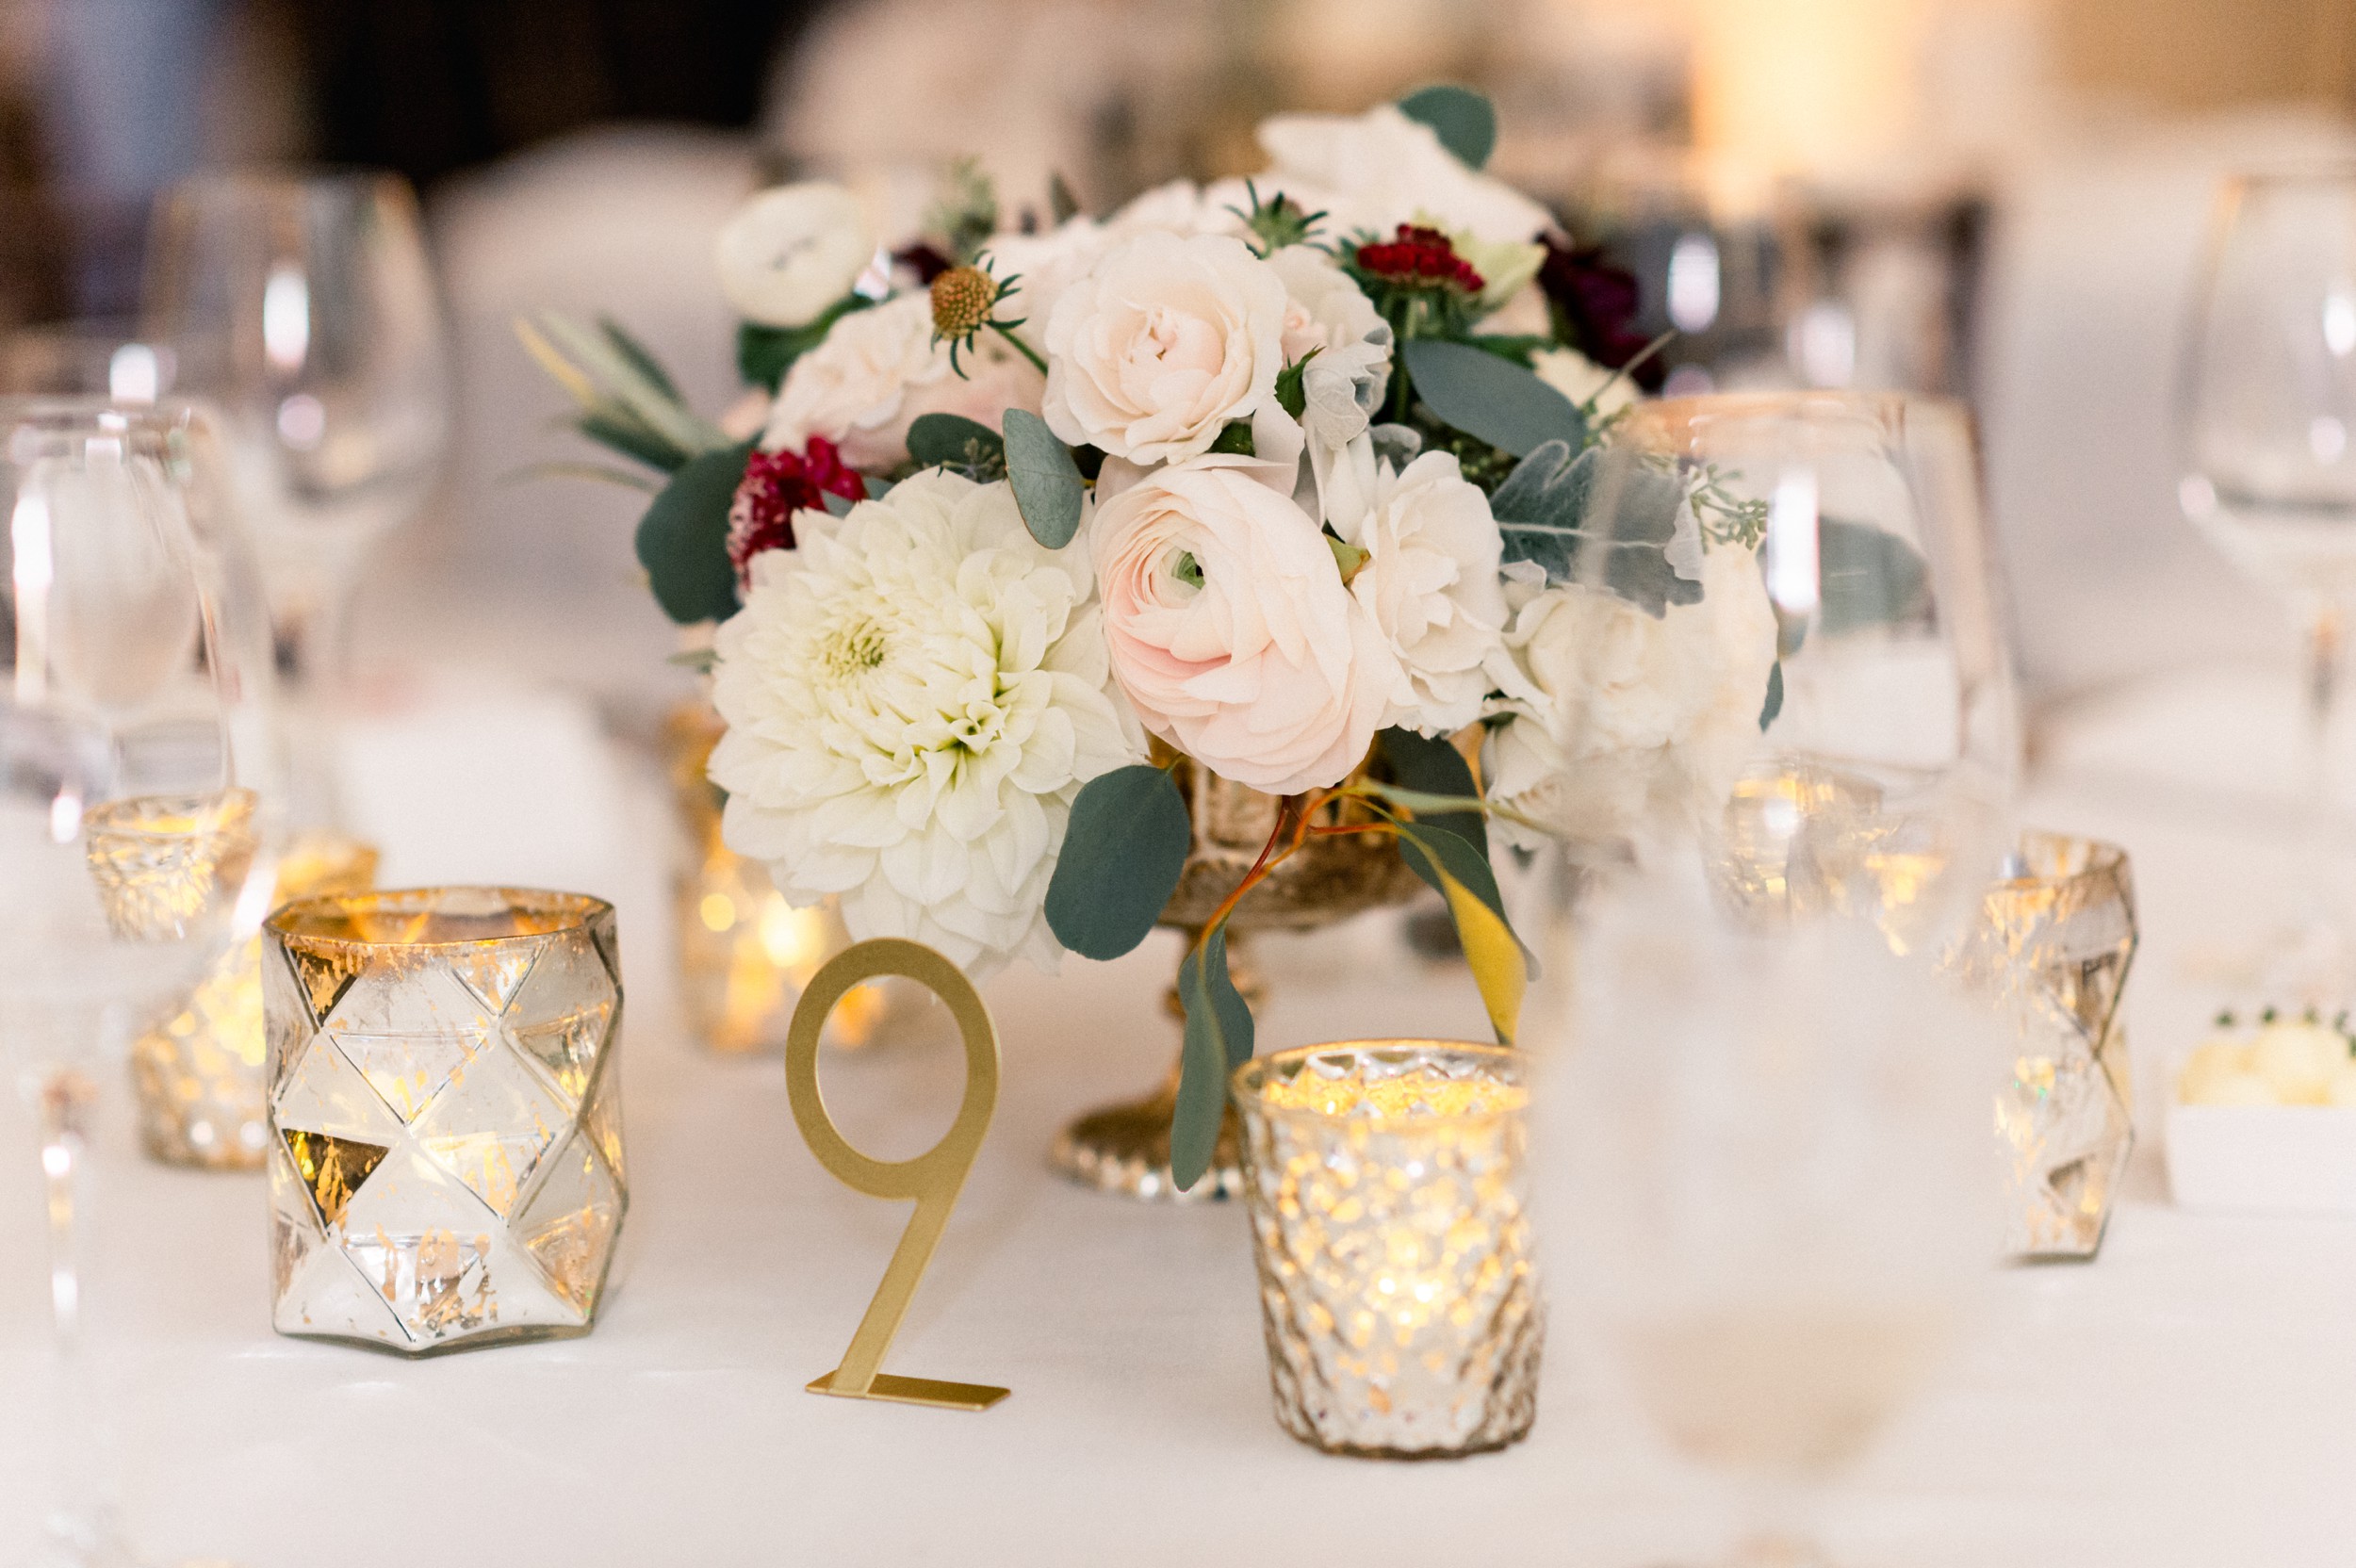 fall florals, candles, and gold table numbers for a black tie Boston wedding at harvard art museum